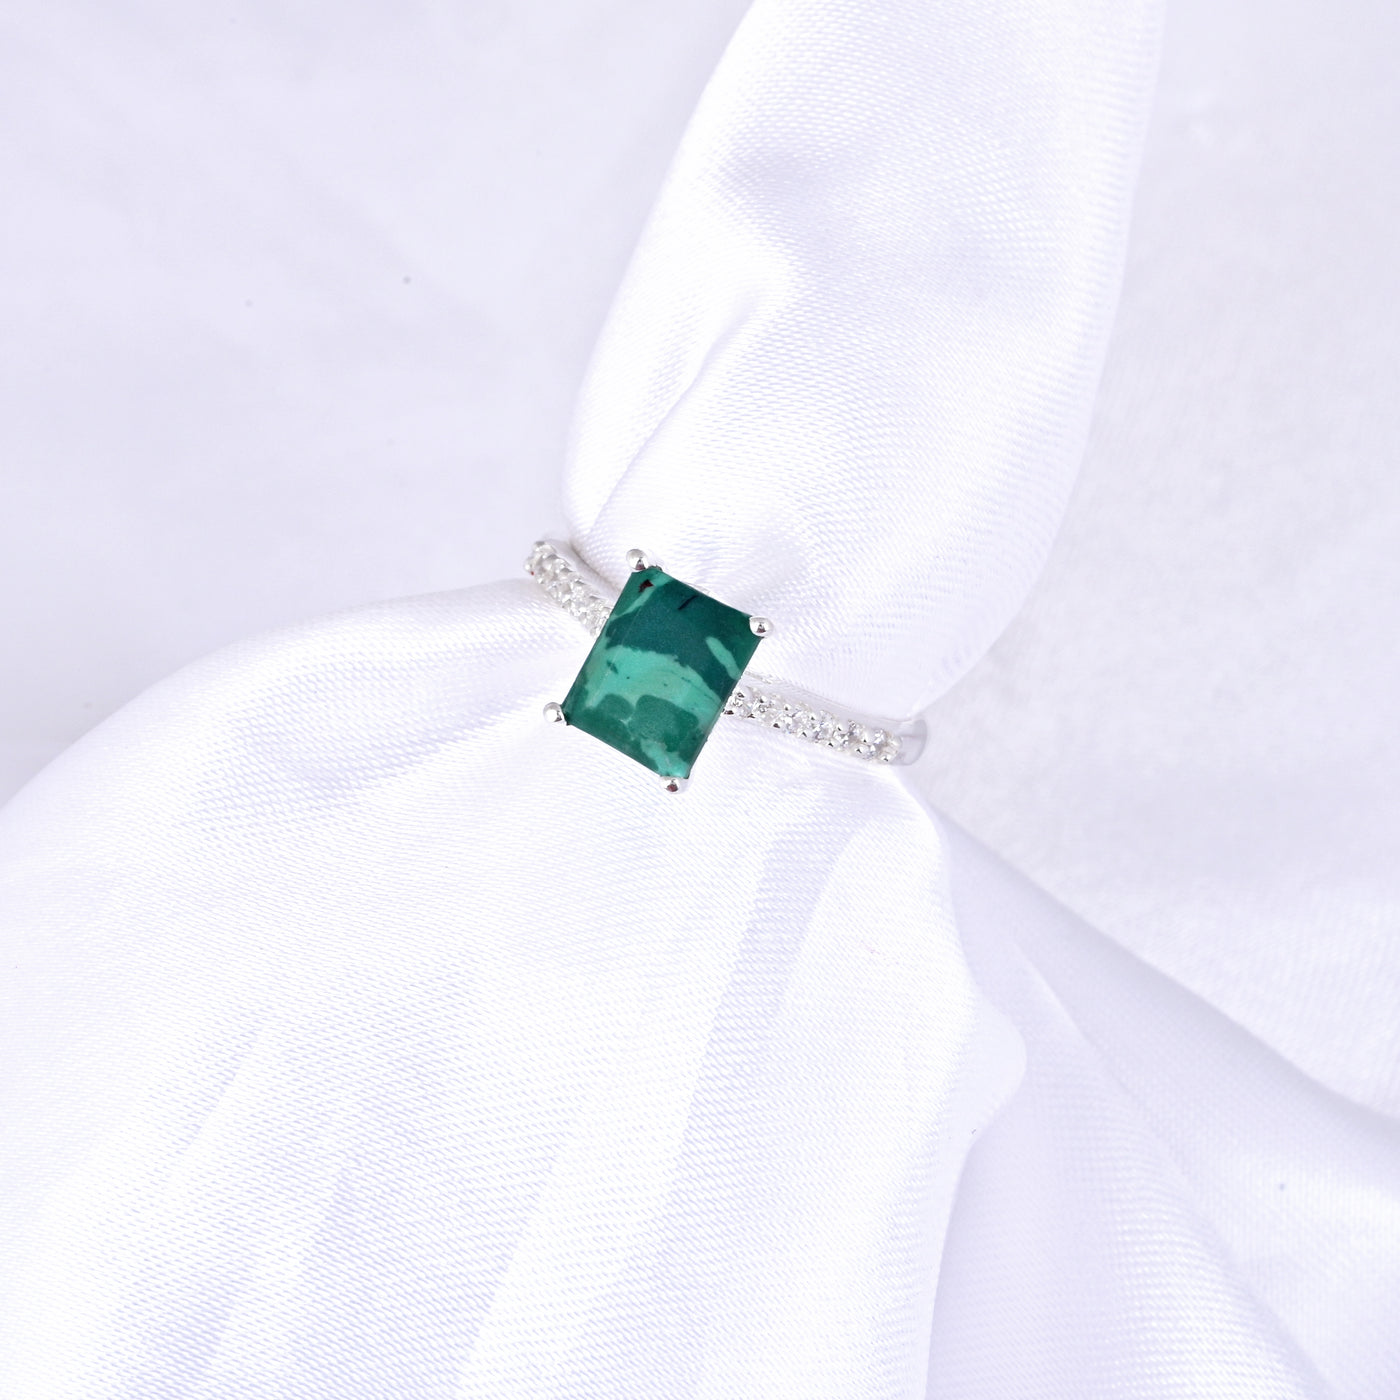 Malachite Bypass Ring 925 Silver Halo Engagement Ring